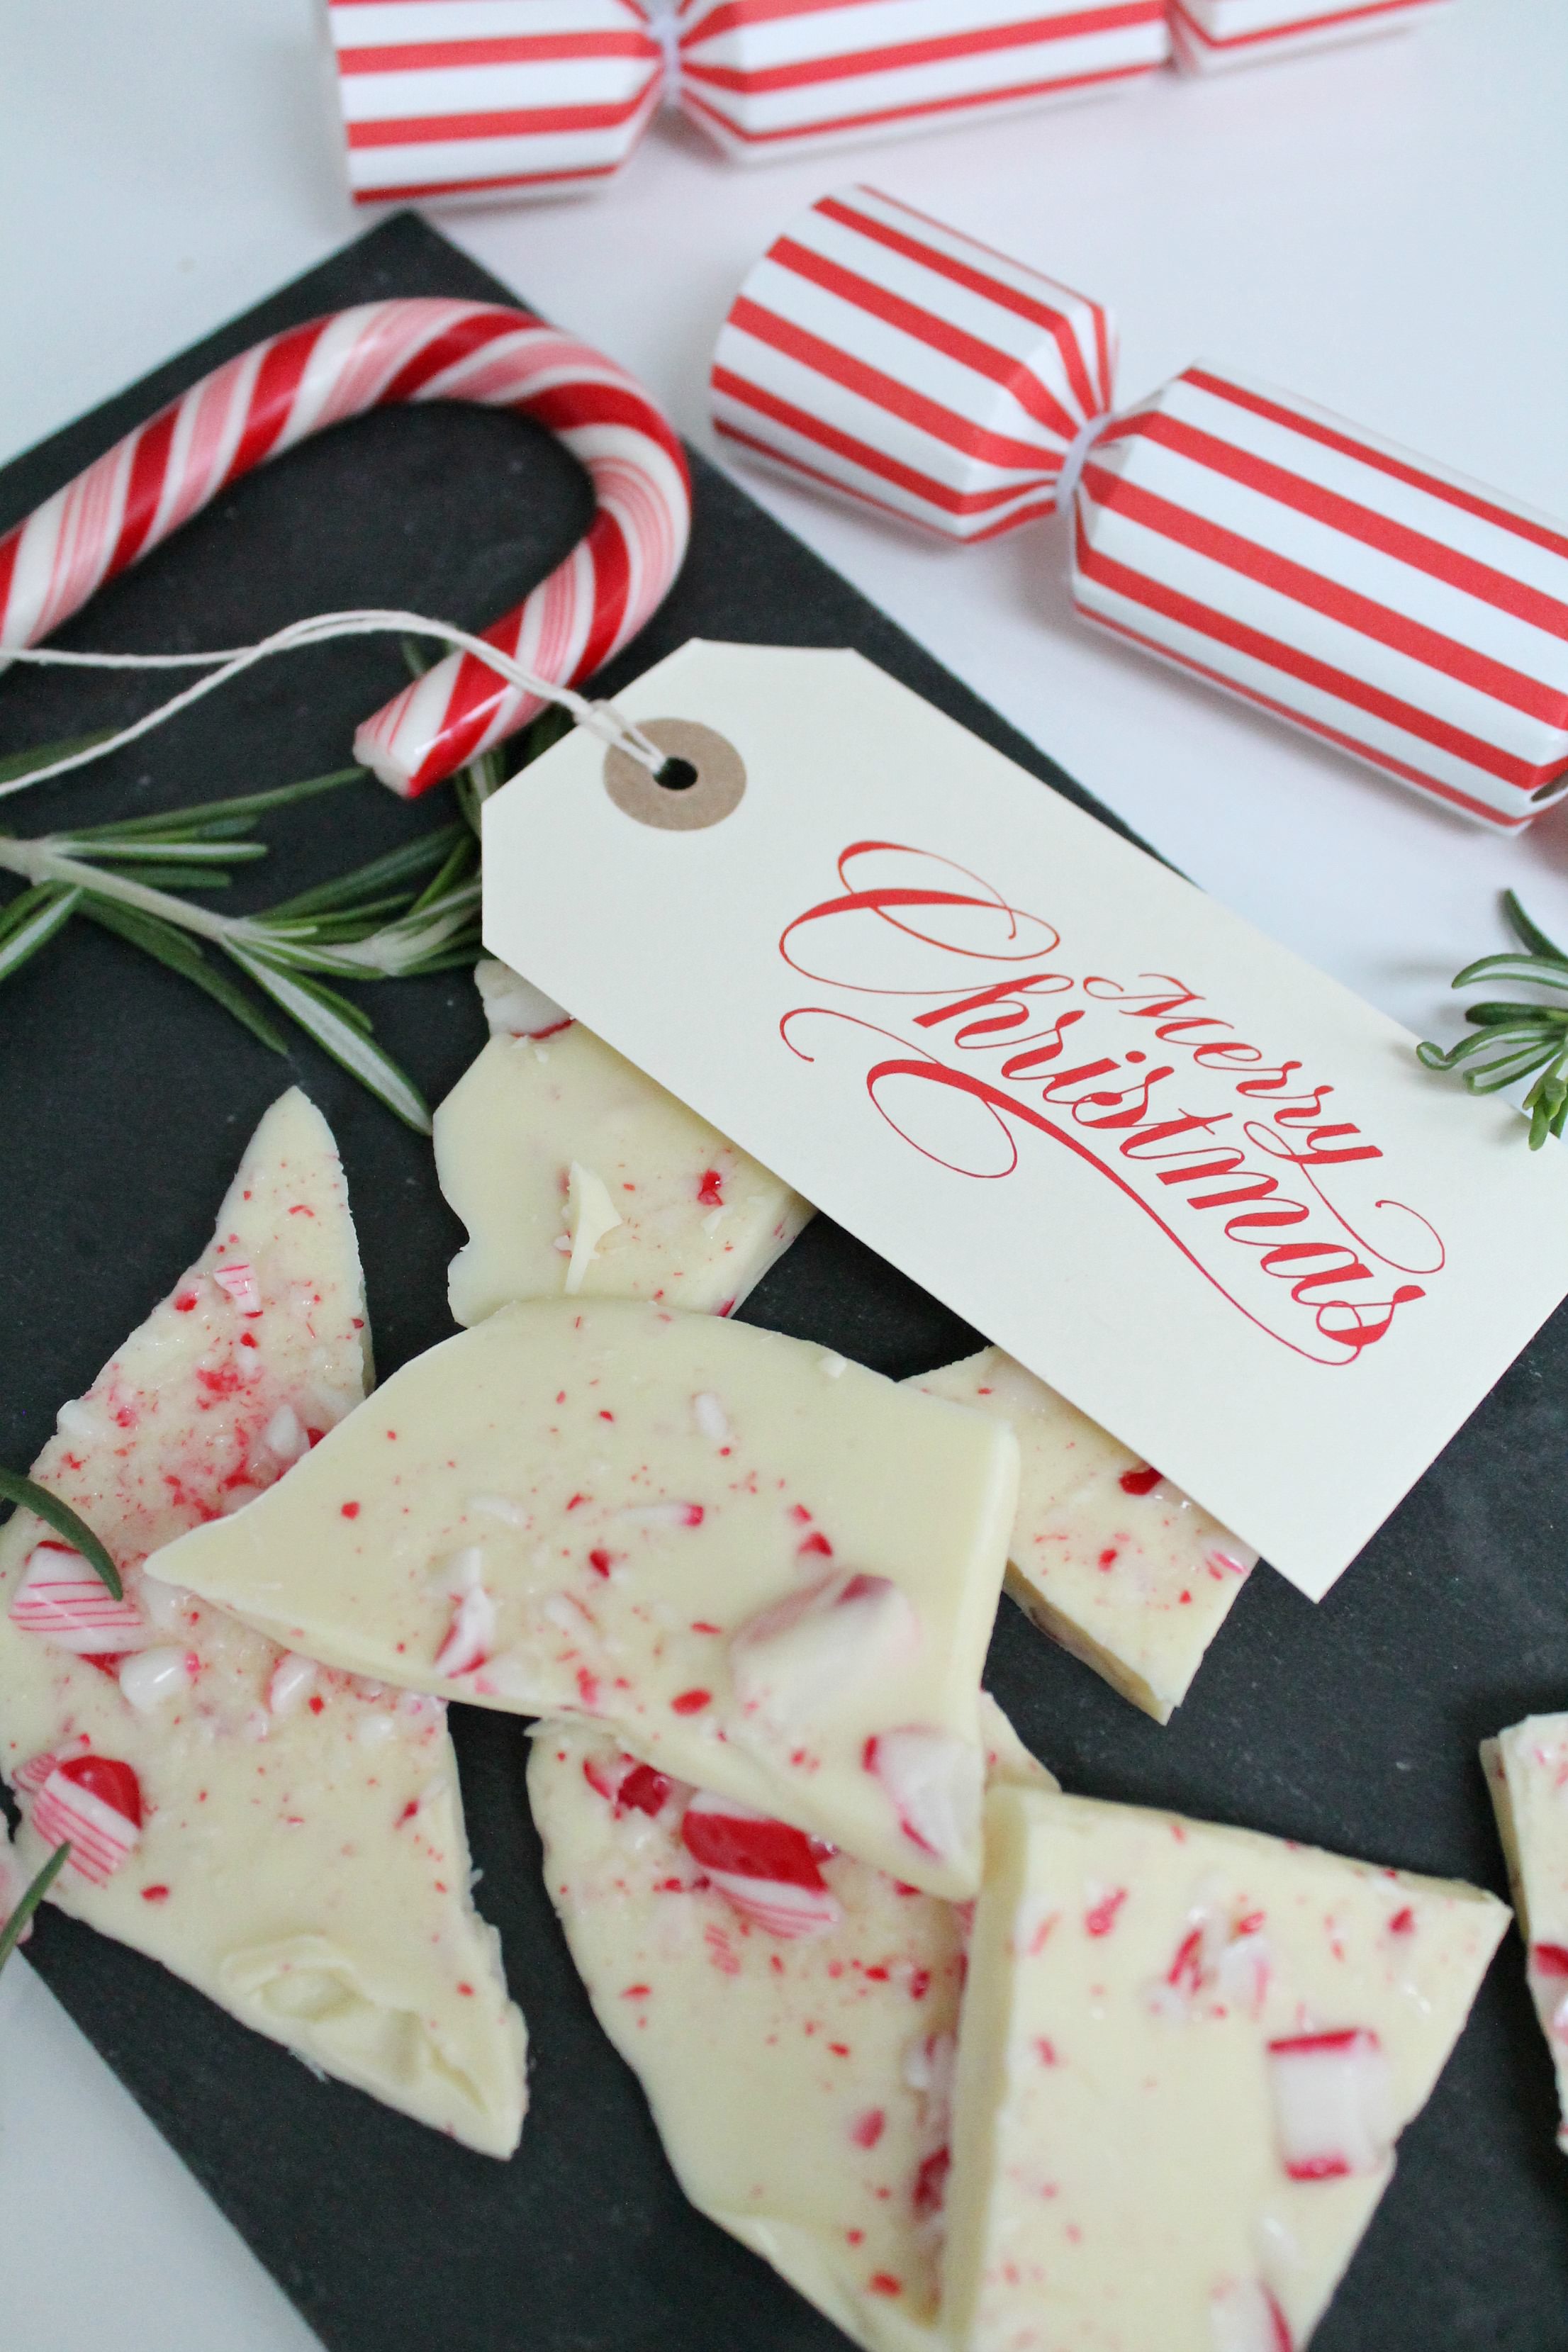 Peppermint-bark-chocolate-recipe-Christmas-by-Little-Big-Bell